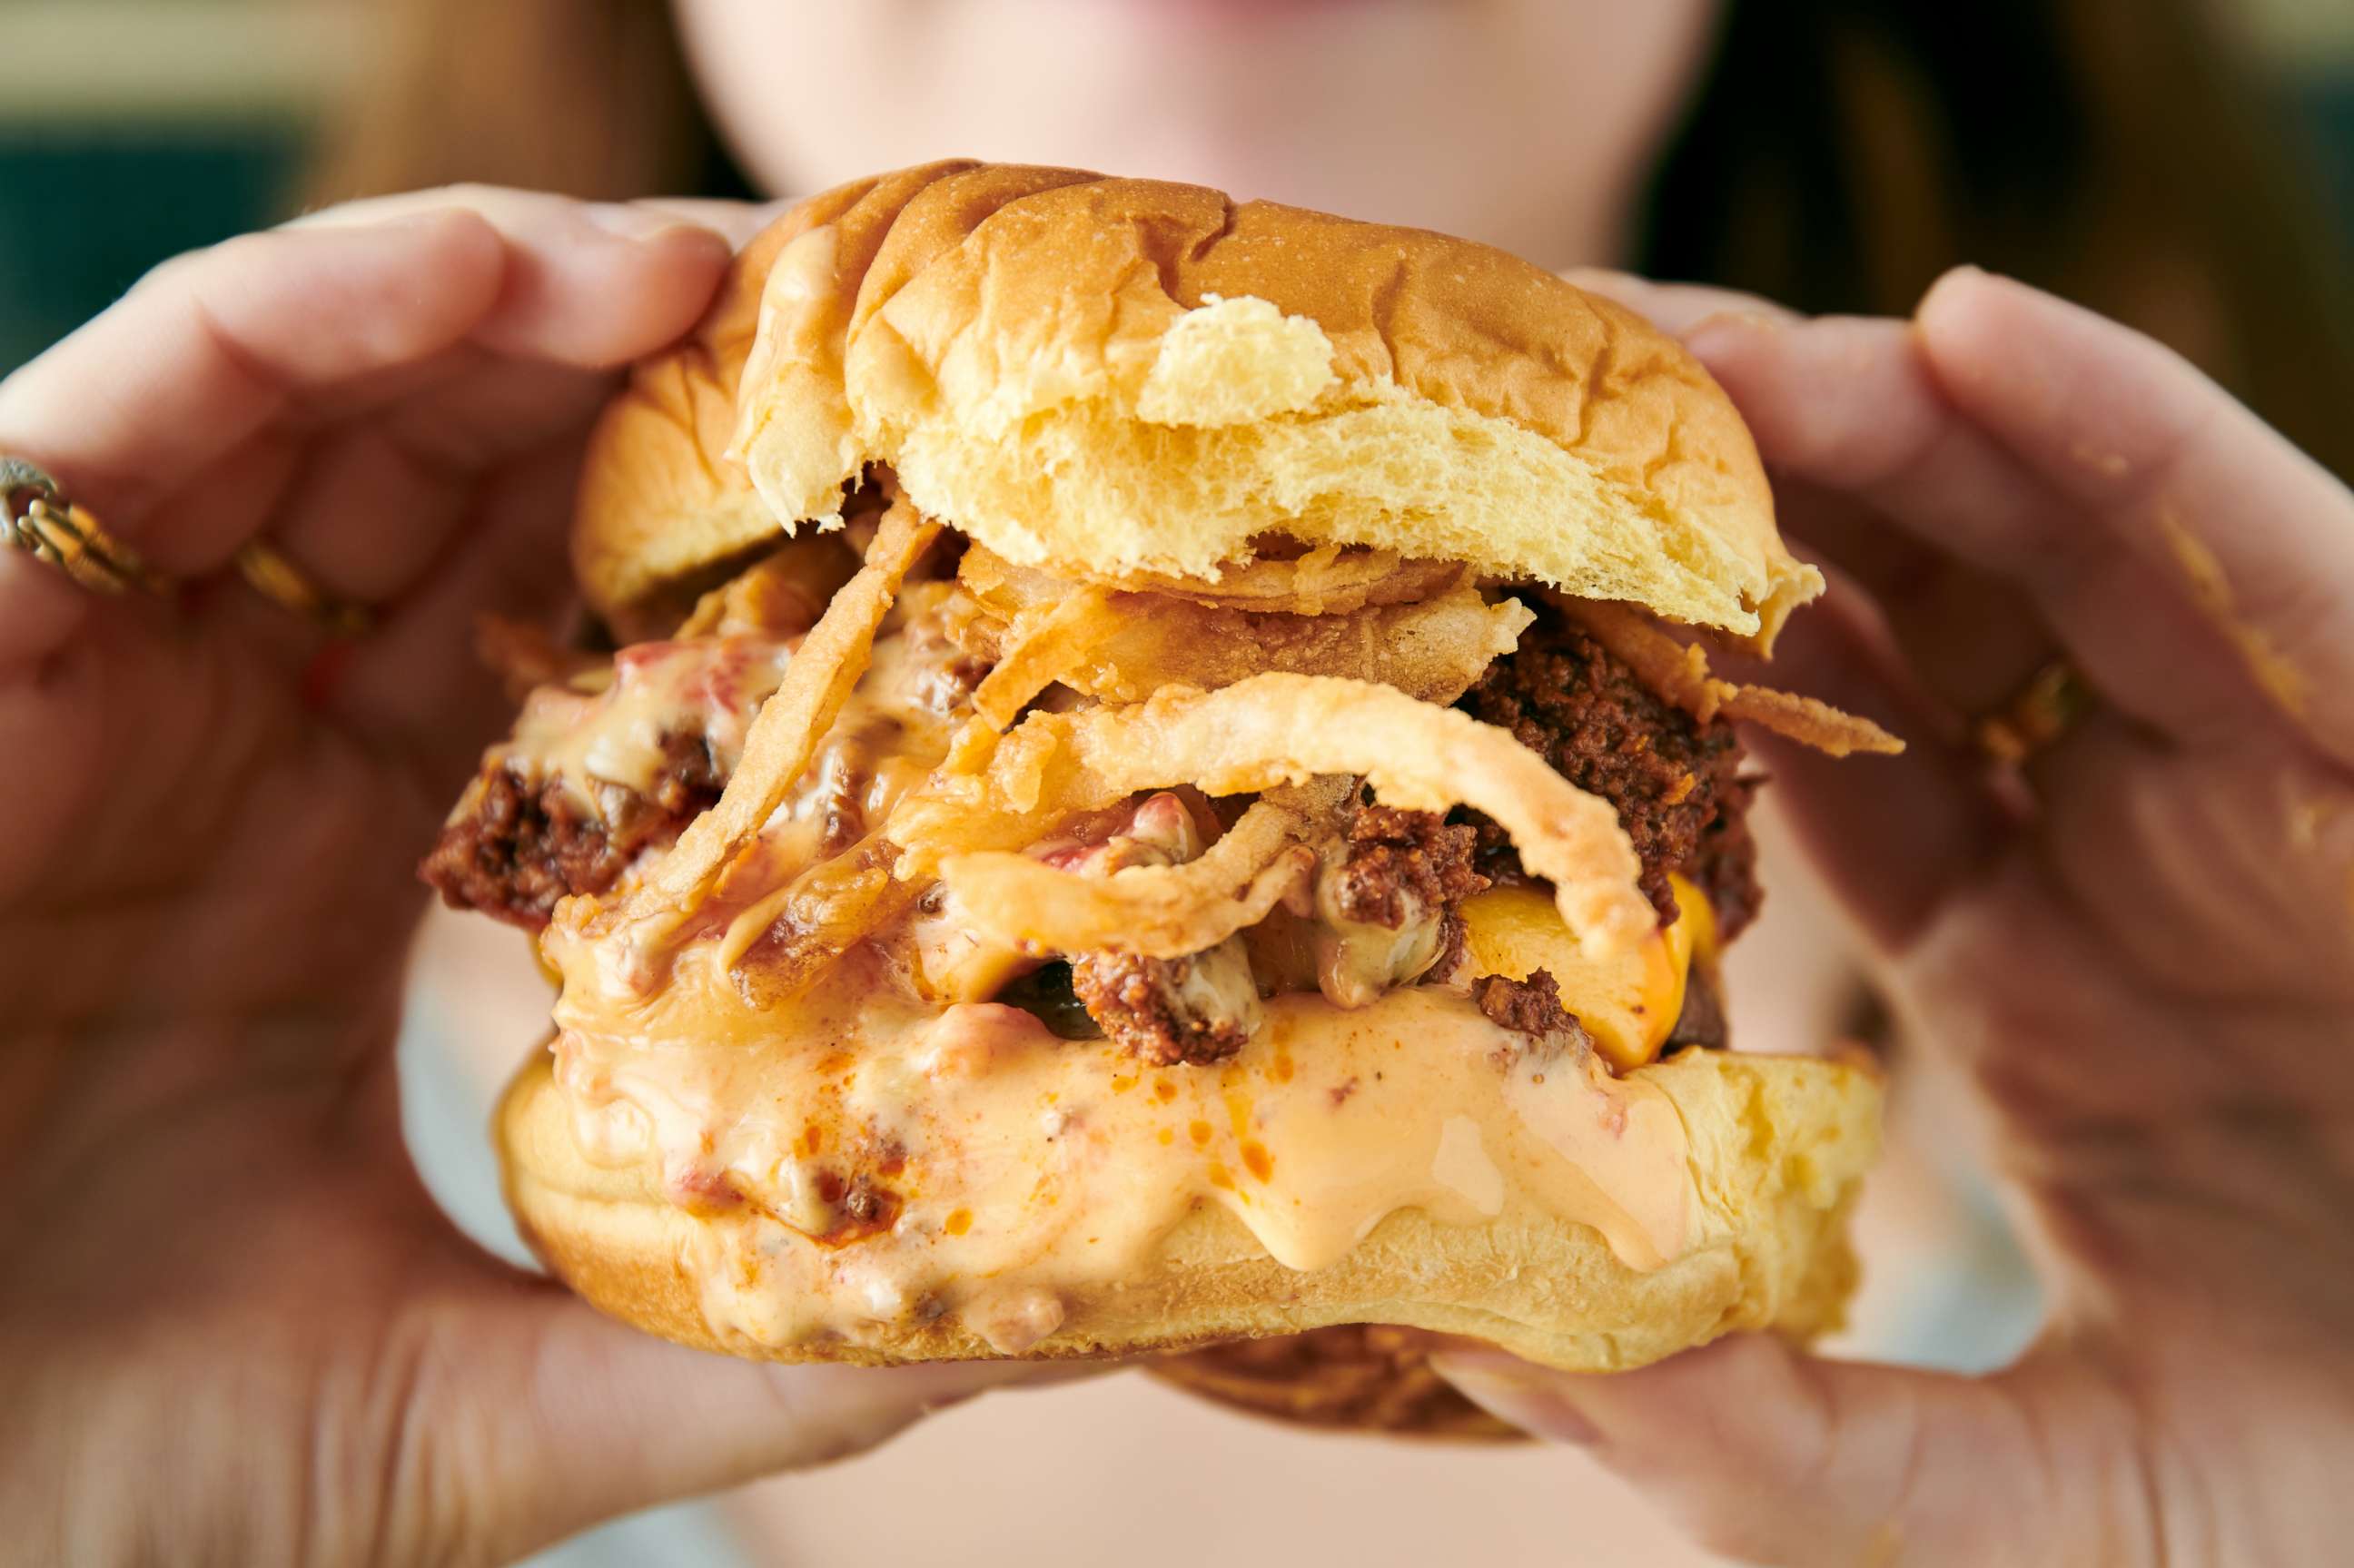 PHOTO: Upgrade your game-day grub this year with these chili cheeseburgers from the mastermind behind Black Tap Craft Burgers and Beer.
 